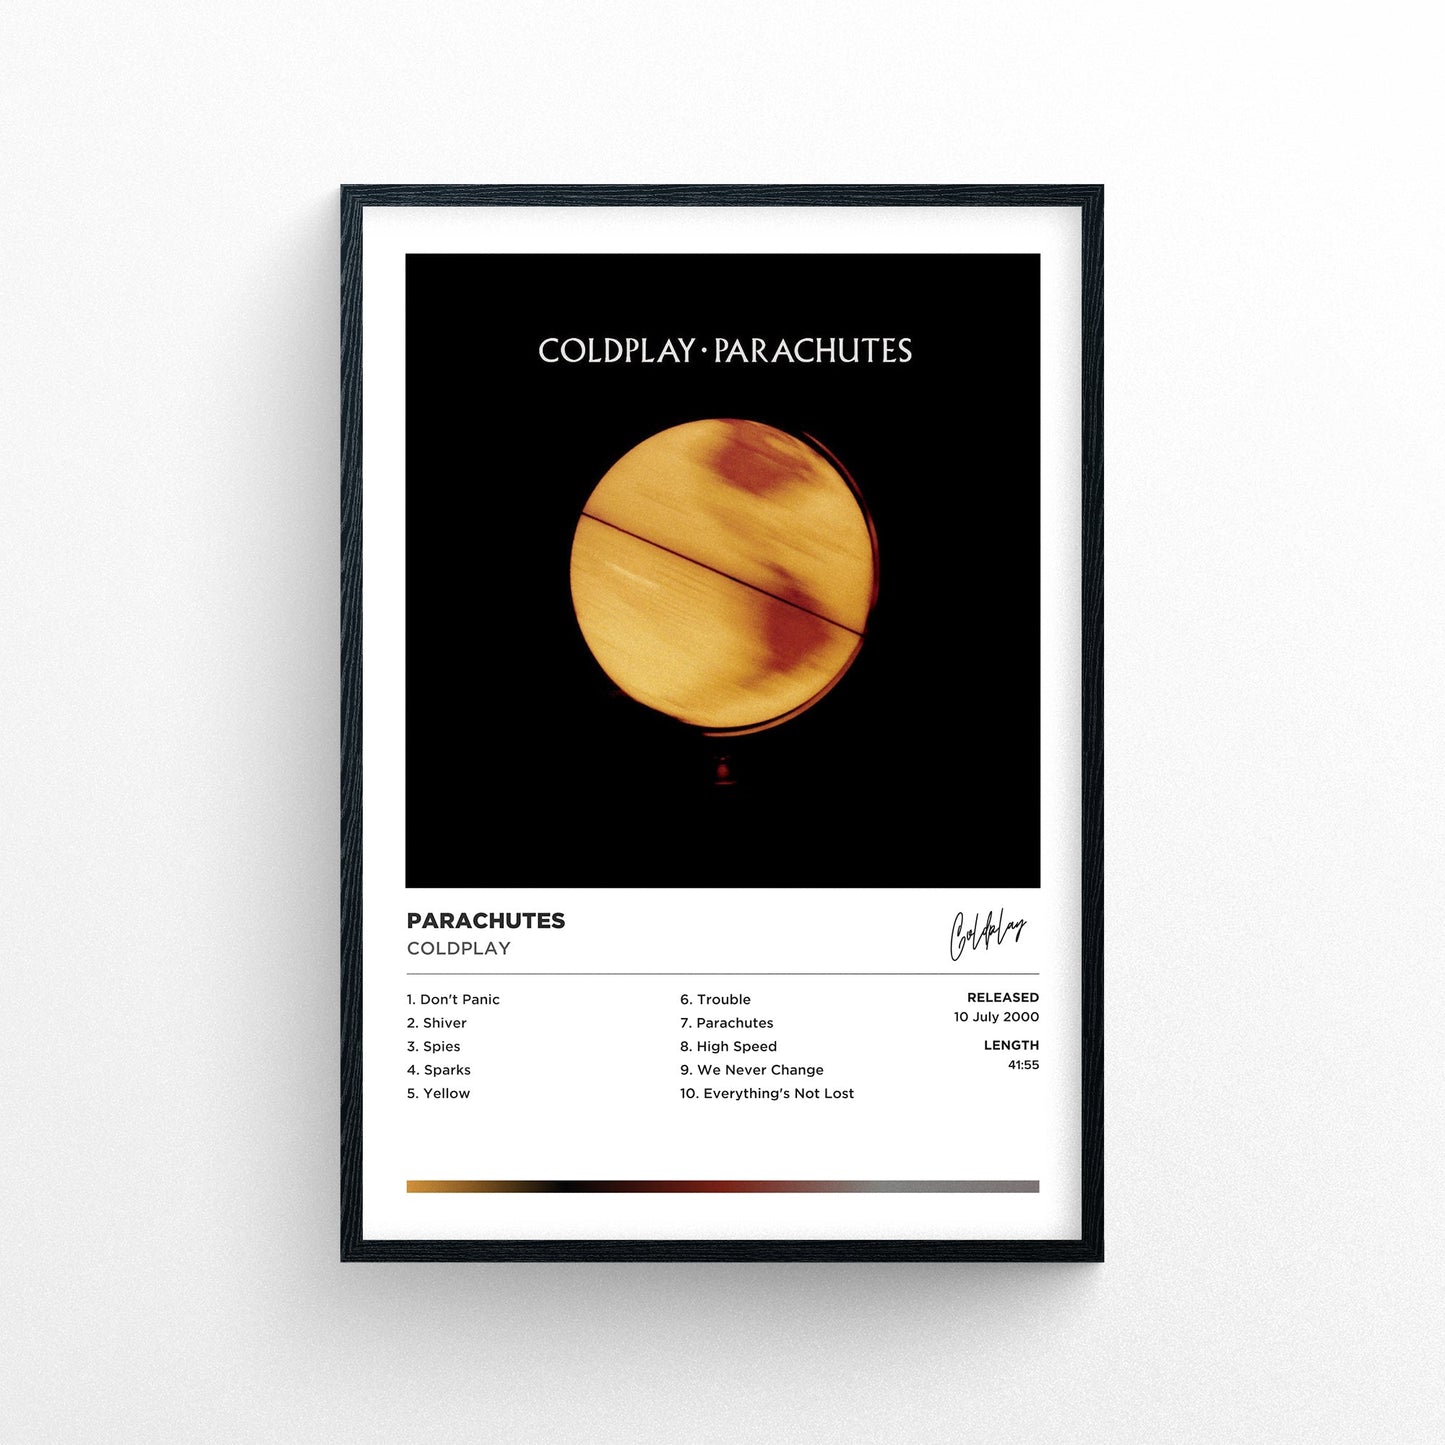 Coldplay - Parachutes Framed Poster Print | Polaroid Style | Album Cover Artwork